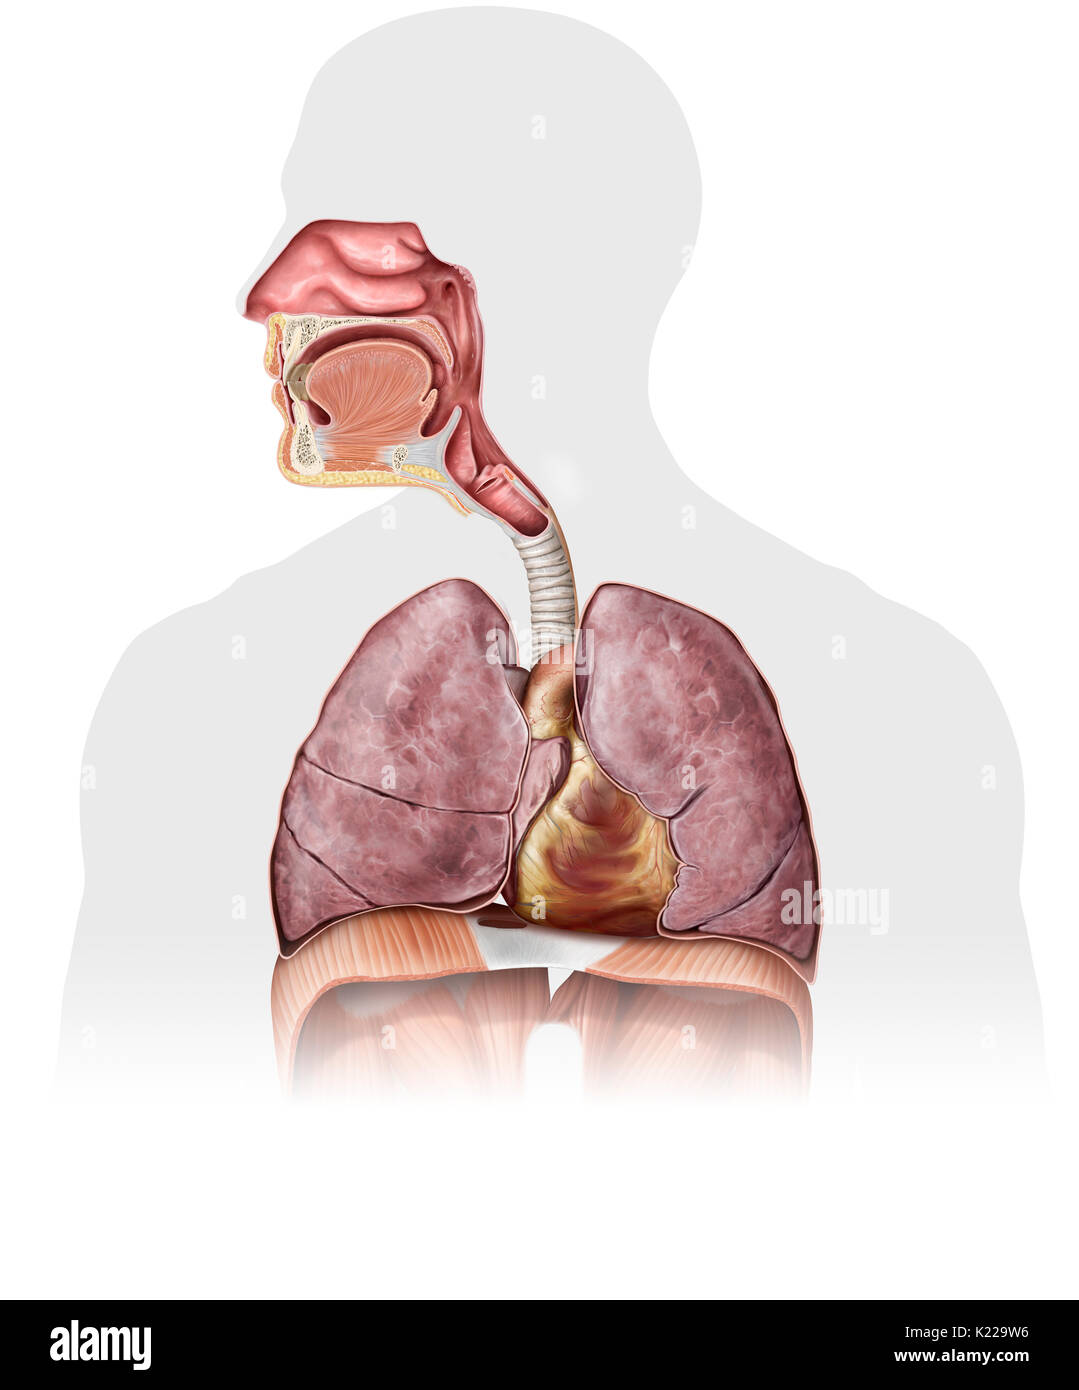 This image shows the nasal cavity, the epiglottis, the mouth, the pharynx, the larynx, the trachea, the heart, the lungs, the trachea and the diaphragm. Stock Photo